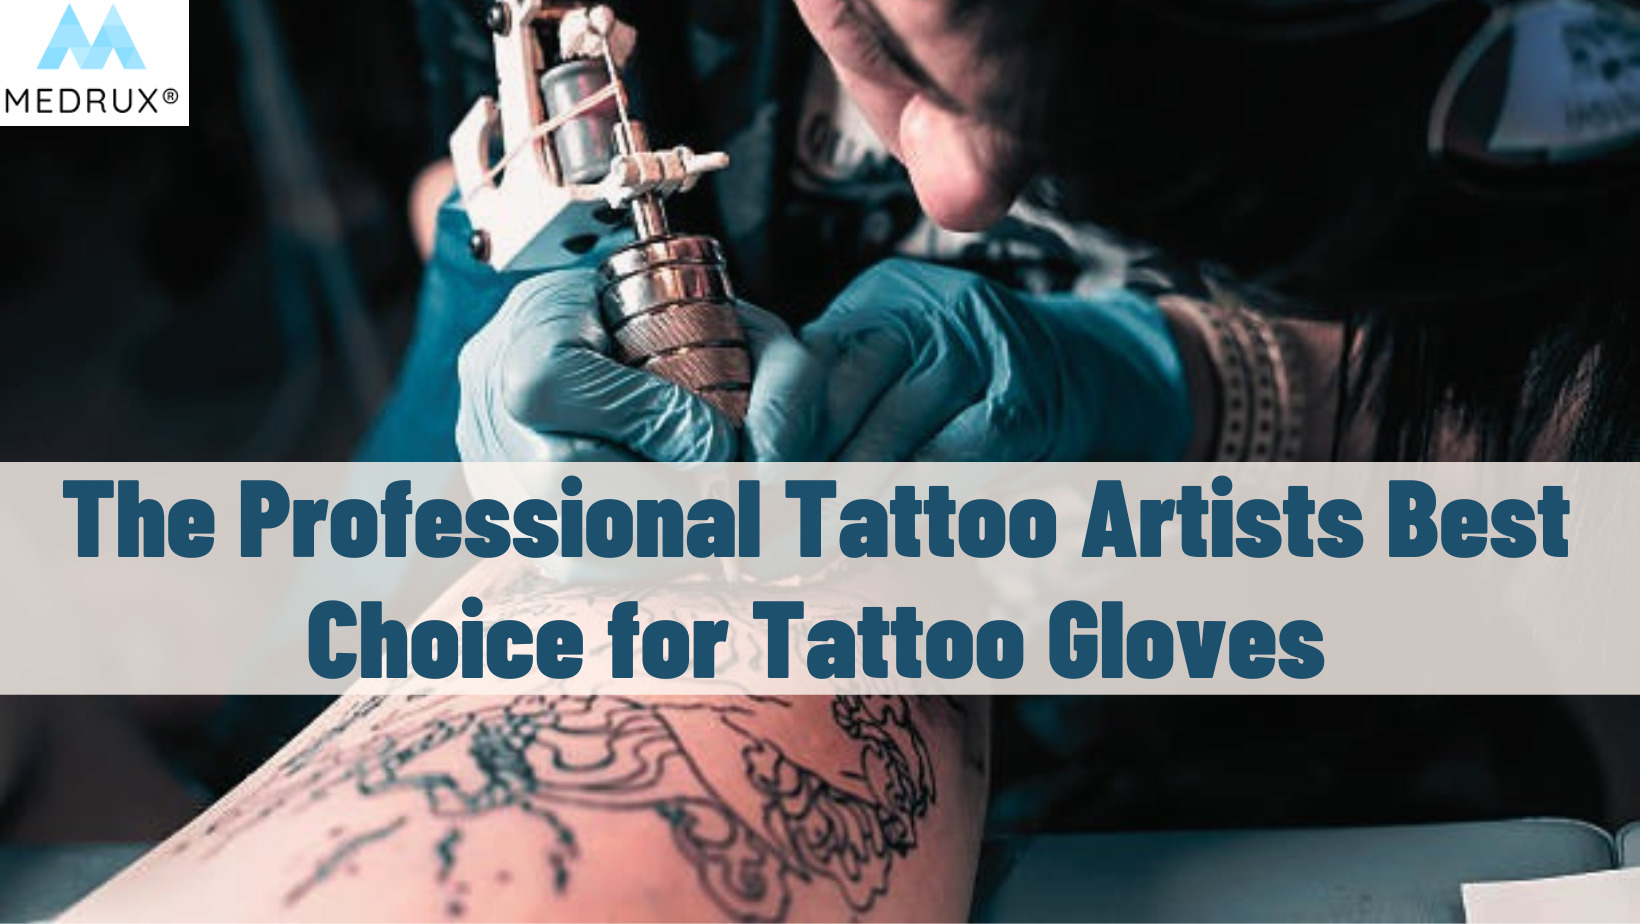 Complications of Tattoos and Tattoo Removal: Stop and Think Before you ink.  - Abstract - Europe PMC